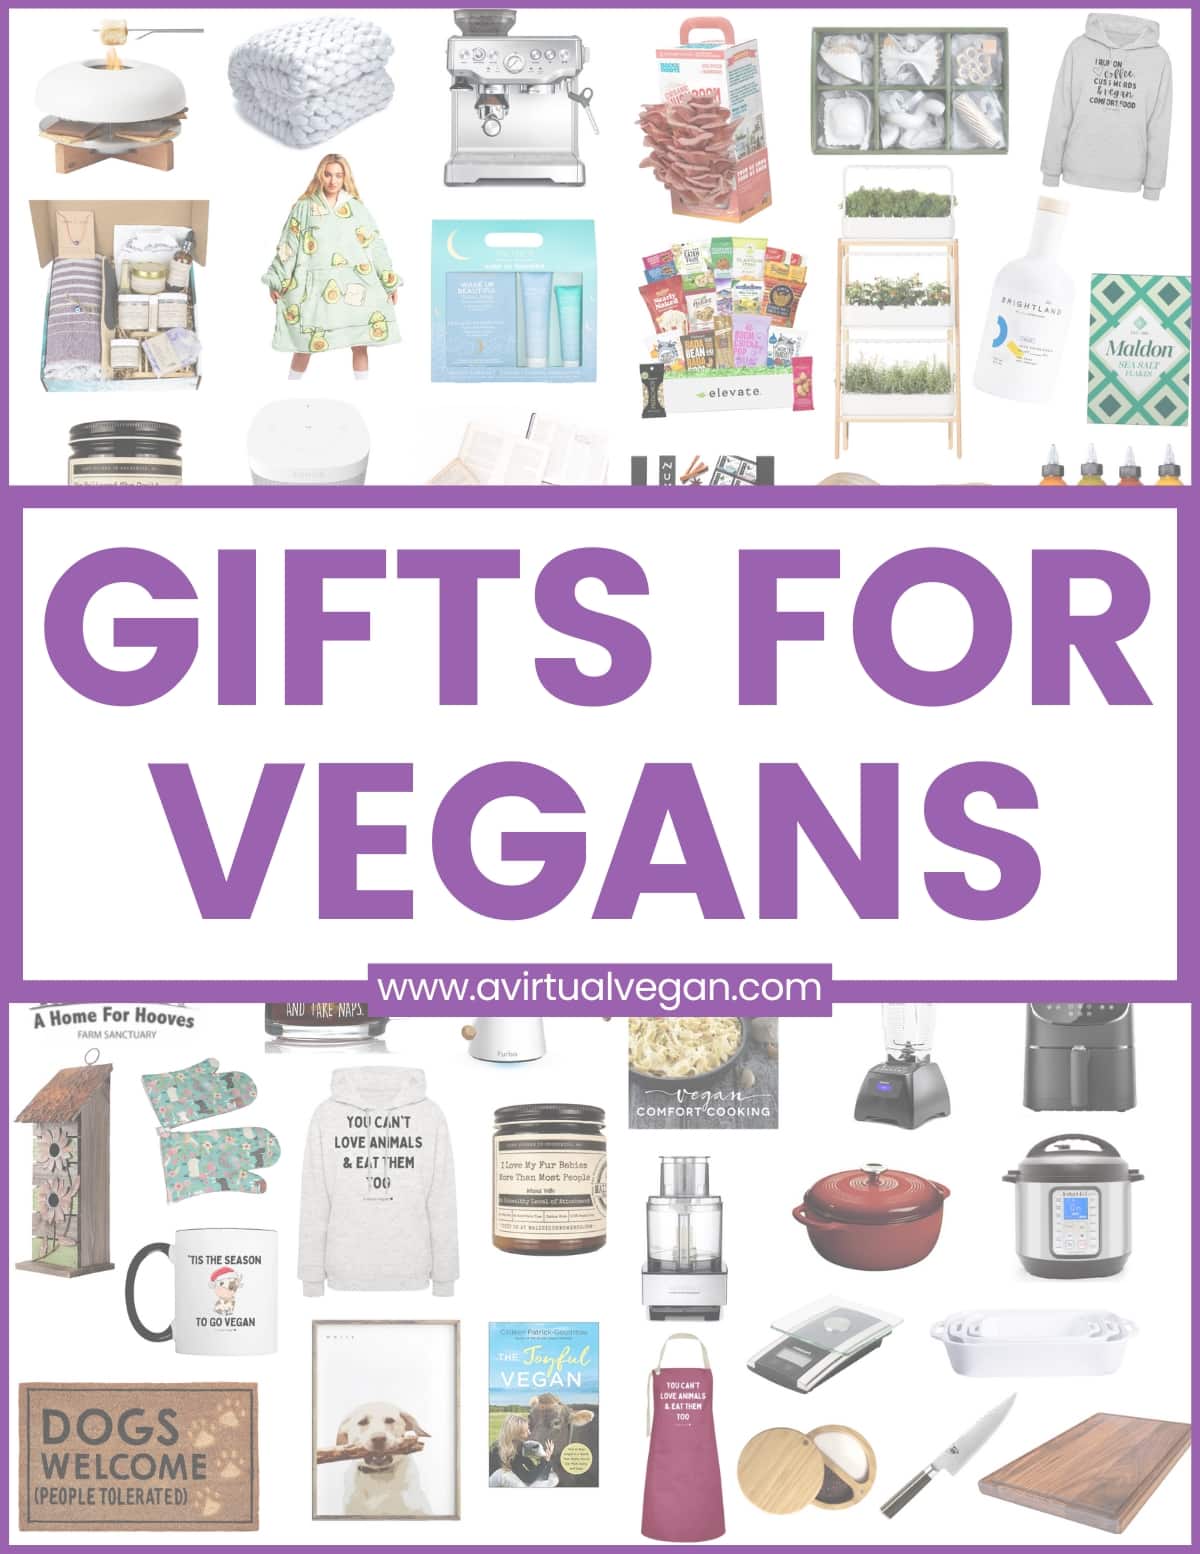 Gifts for Vegans - The Ultimate Guide - A Virtual Vegan